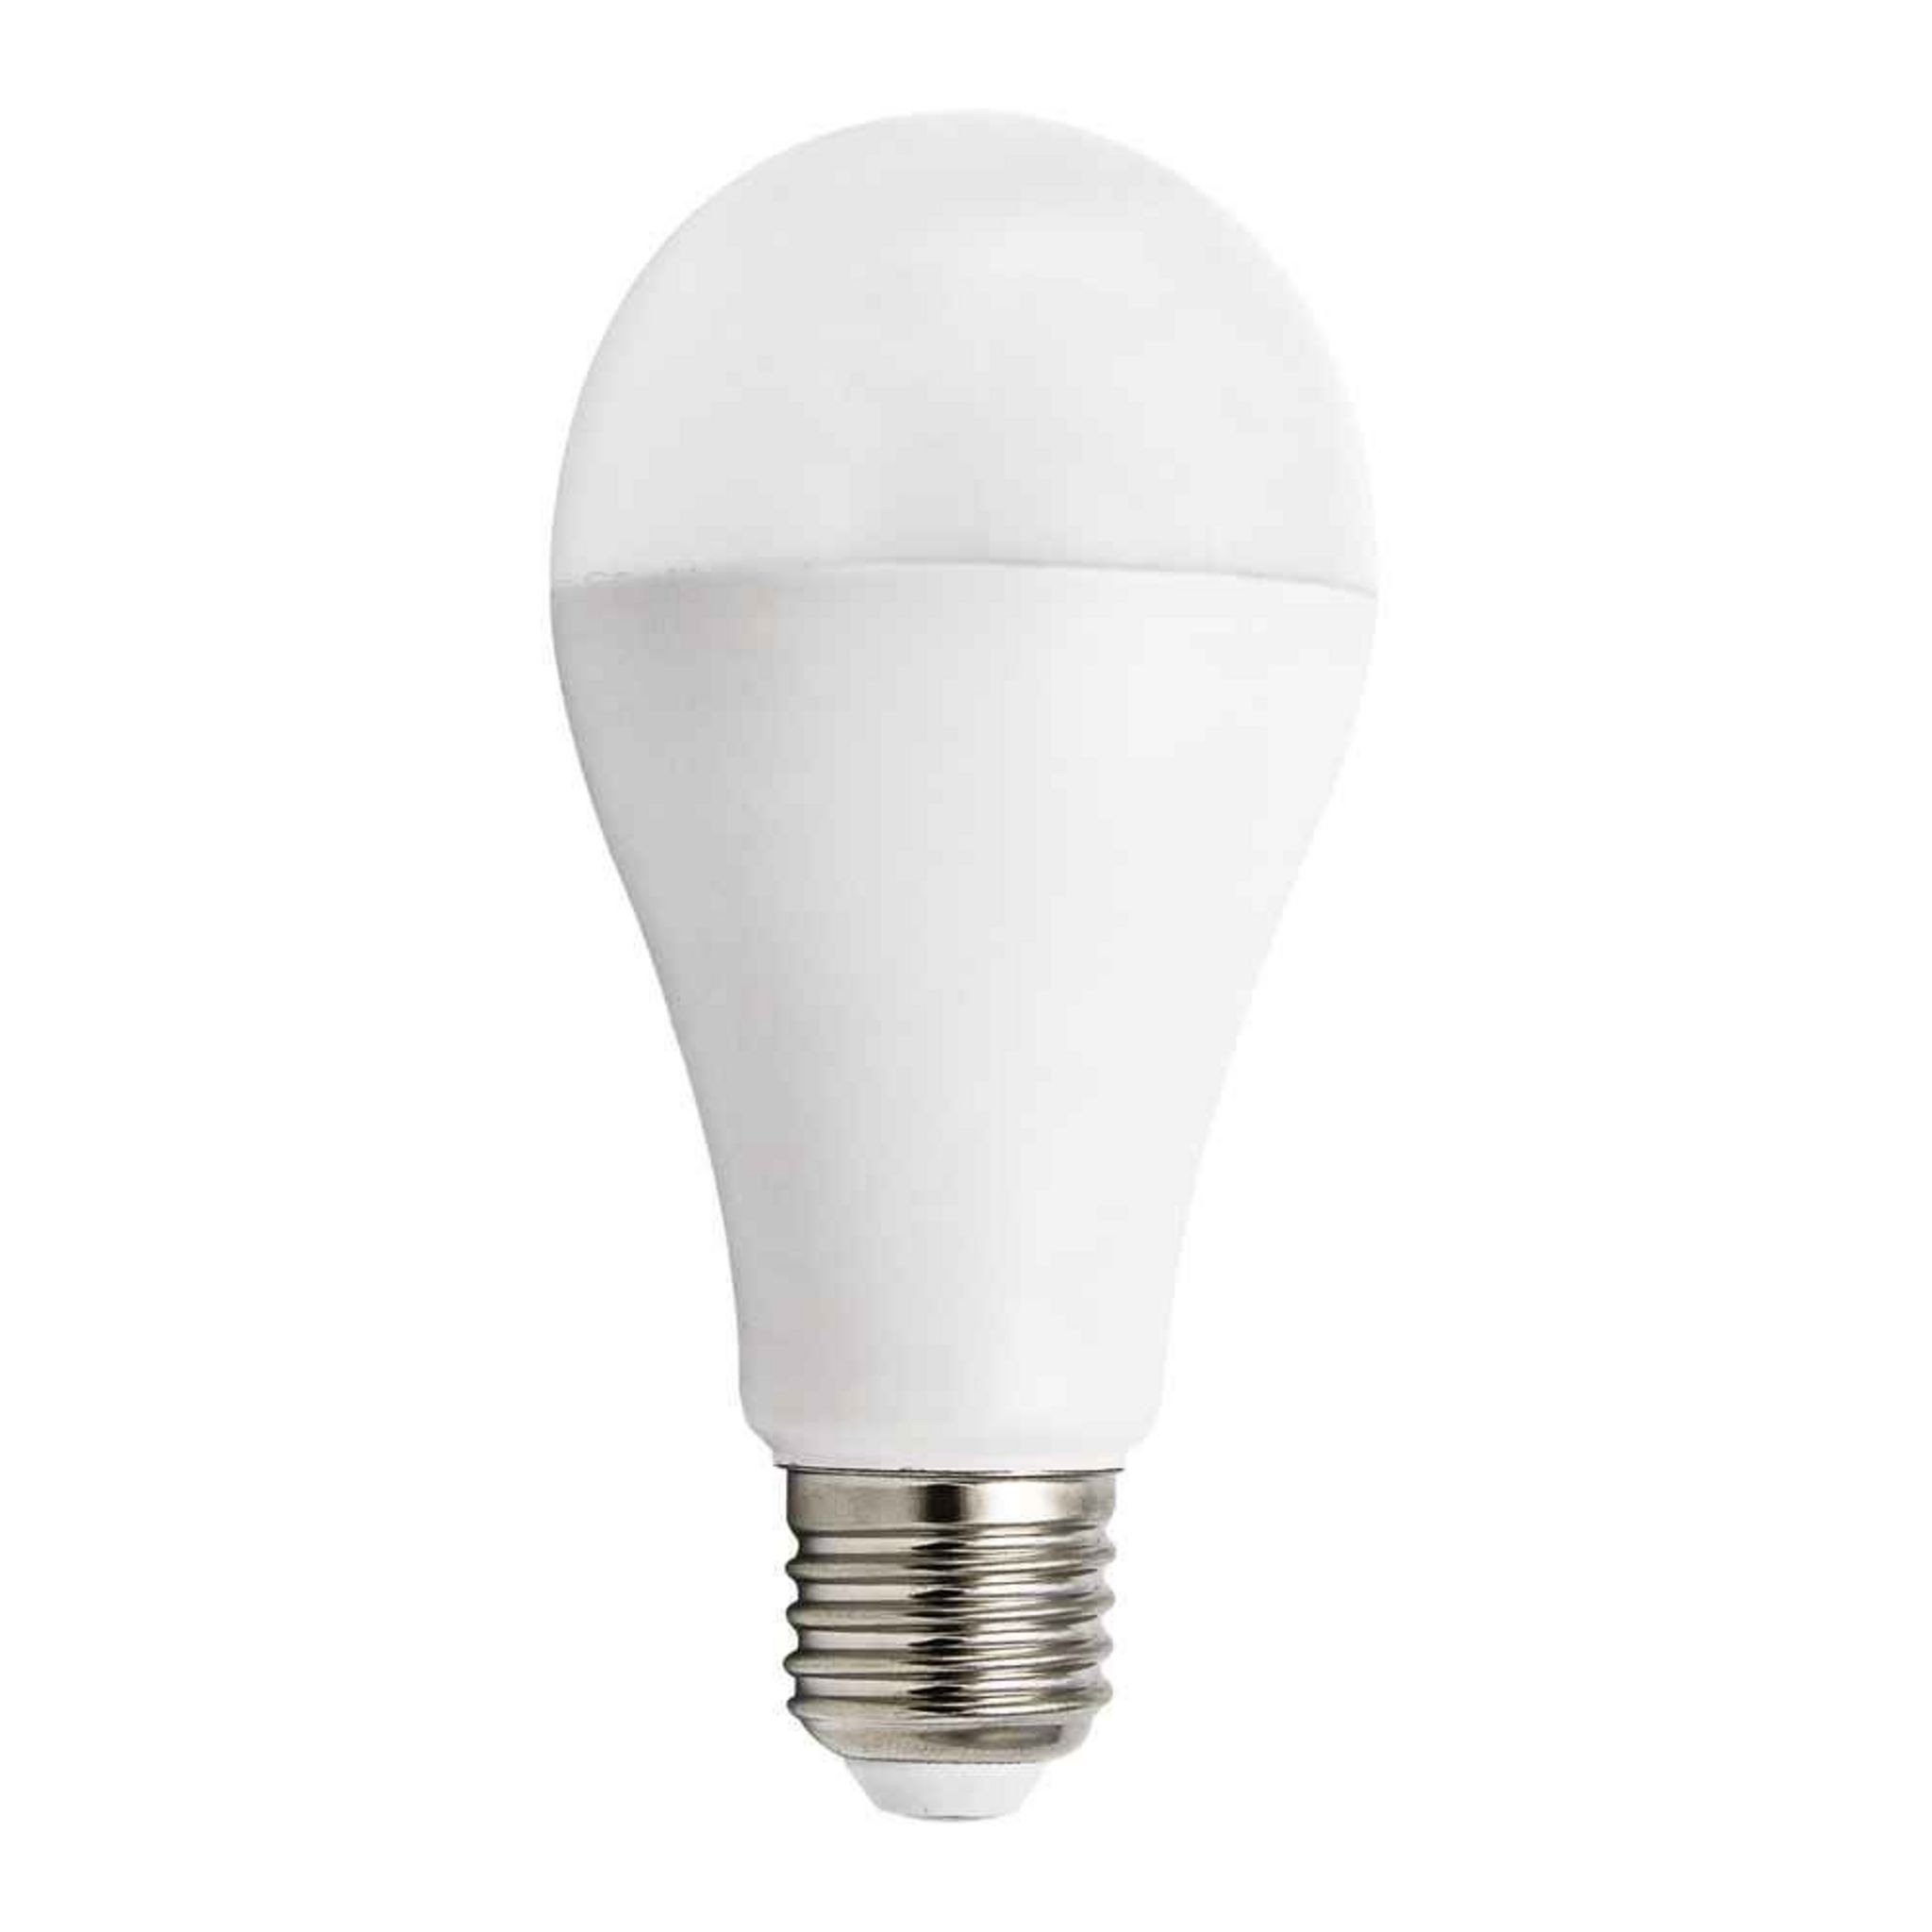 Ampoule led ronde e27 4w blanc/froid - Provence Outillage